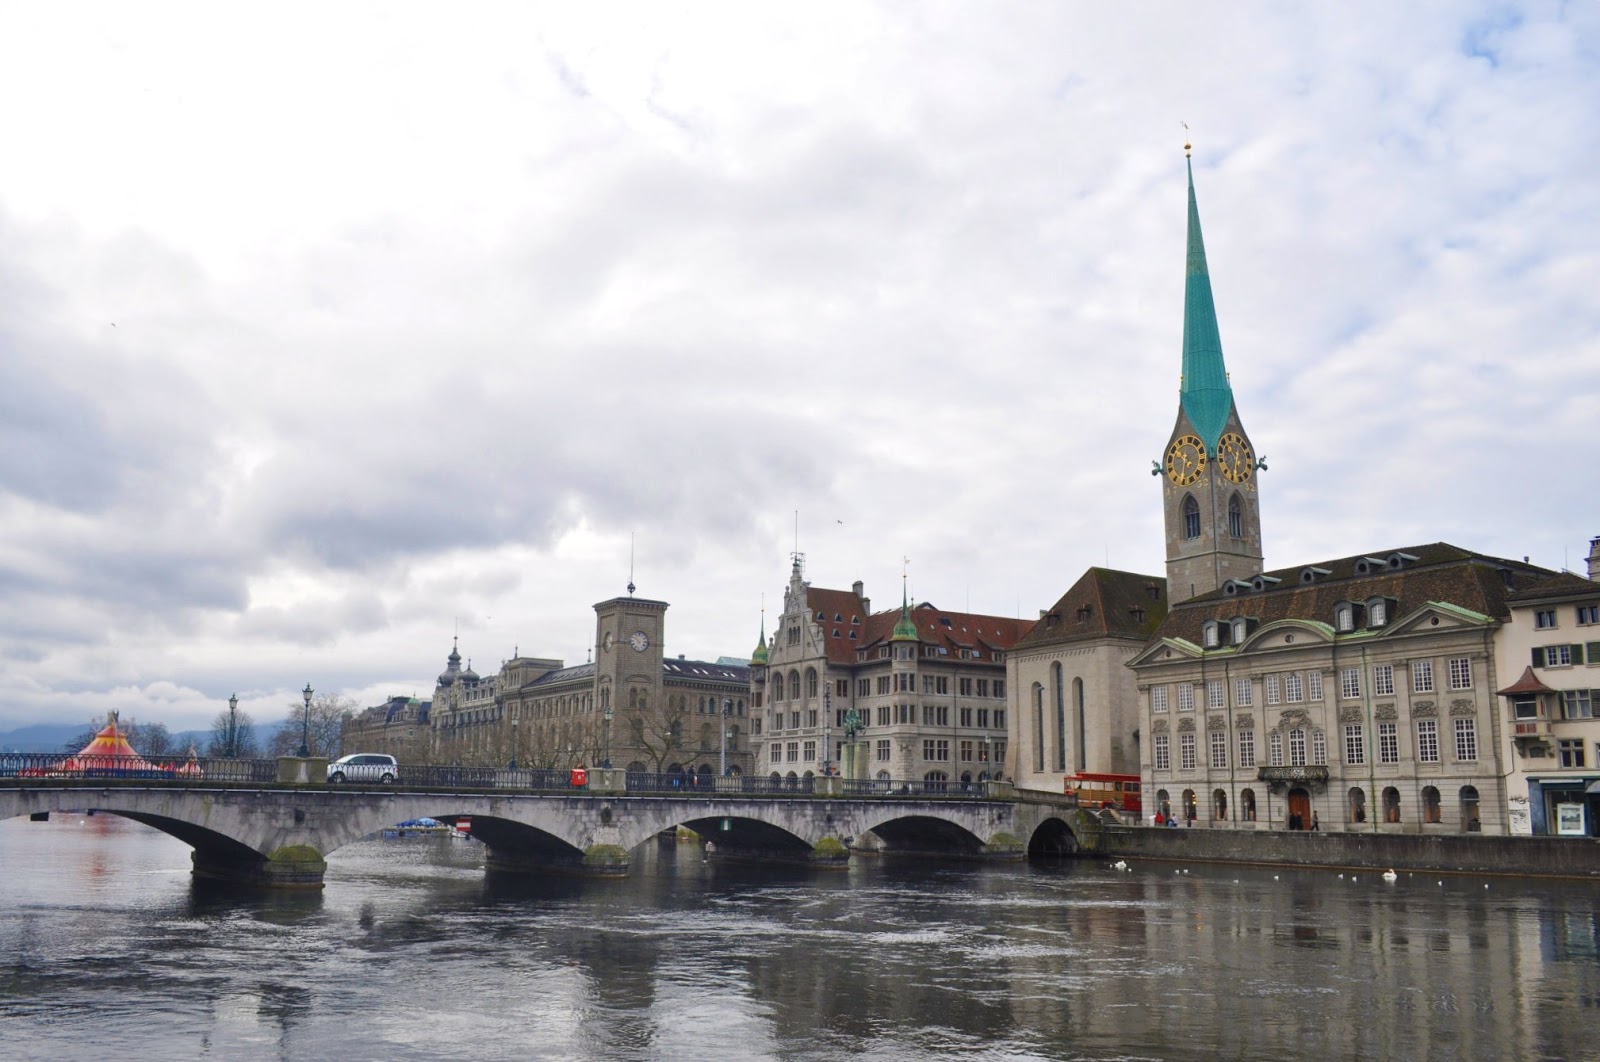 Oh, the places we will go!: Zurich - Our First Stop